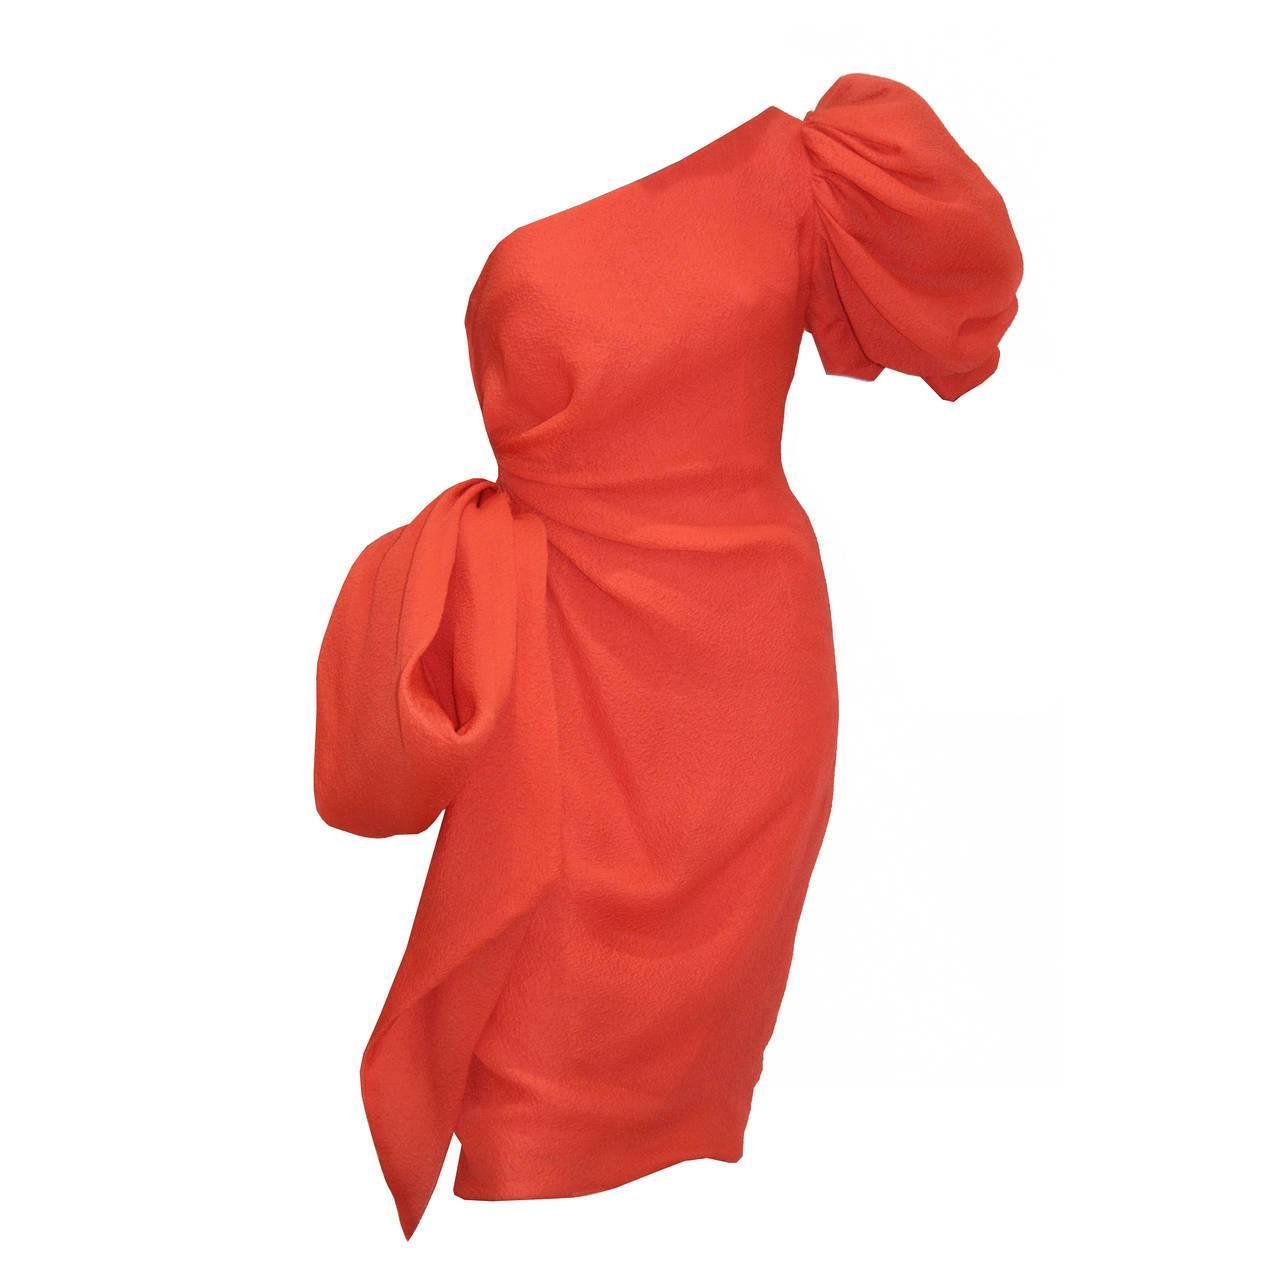 Givenchy asymmetric coral cocktail dress, c. 1988 at 1stdibs